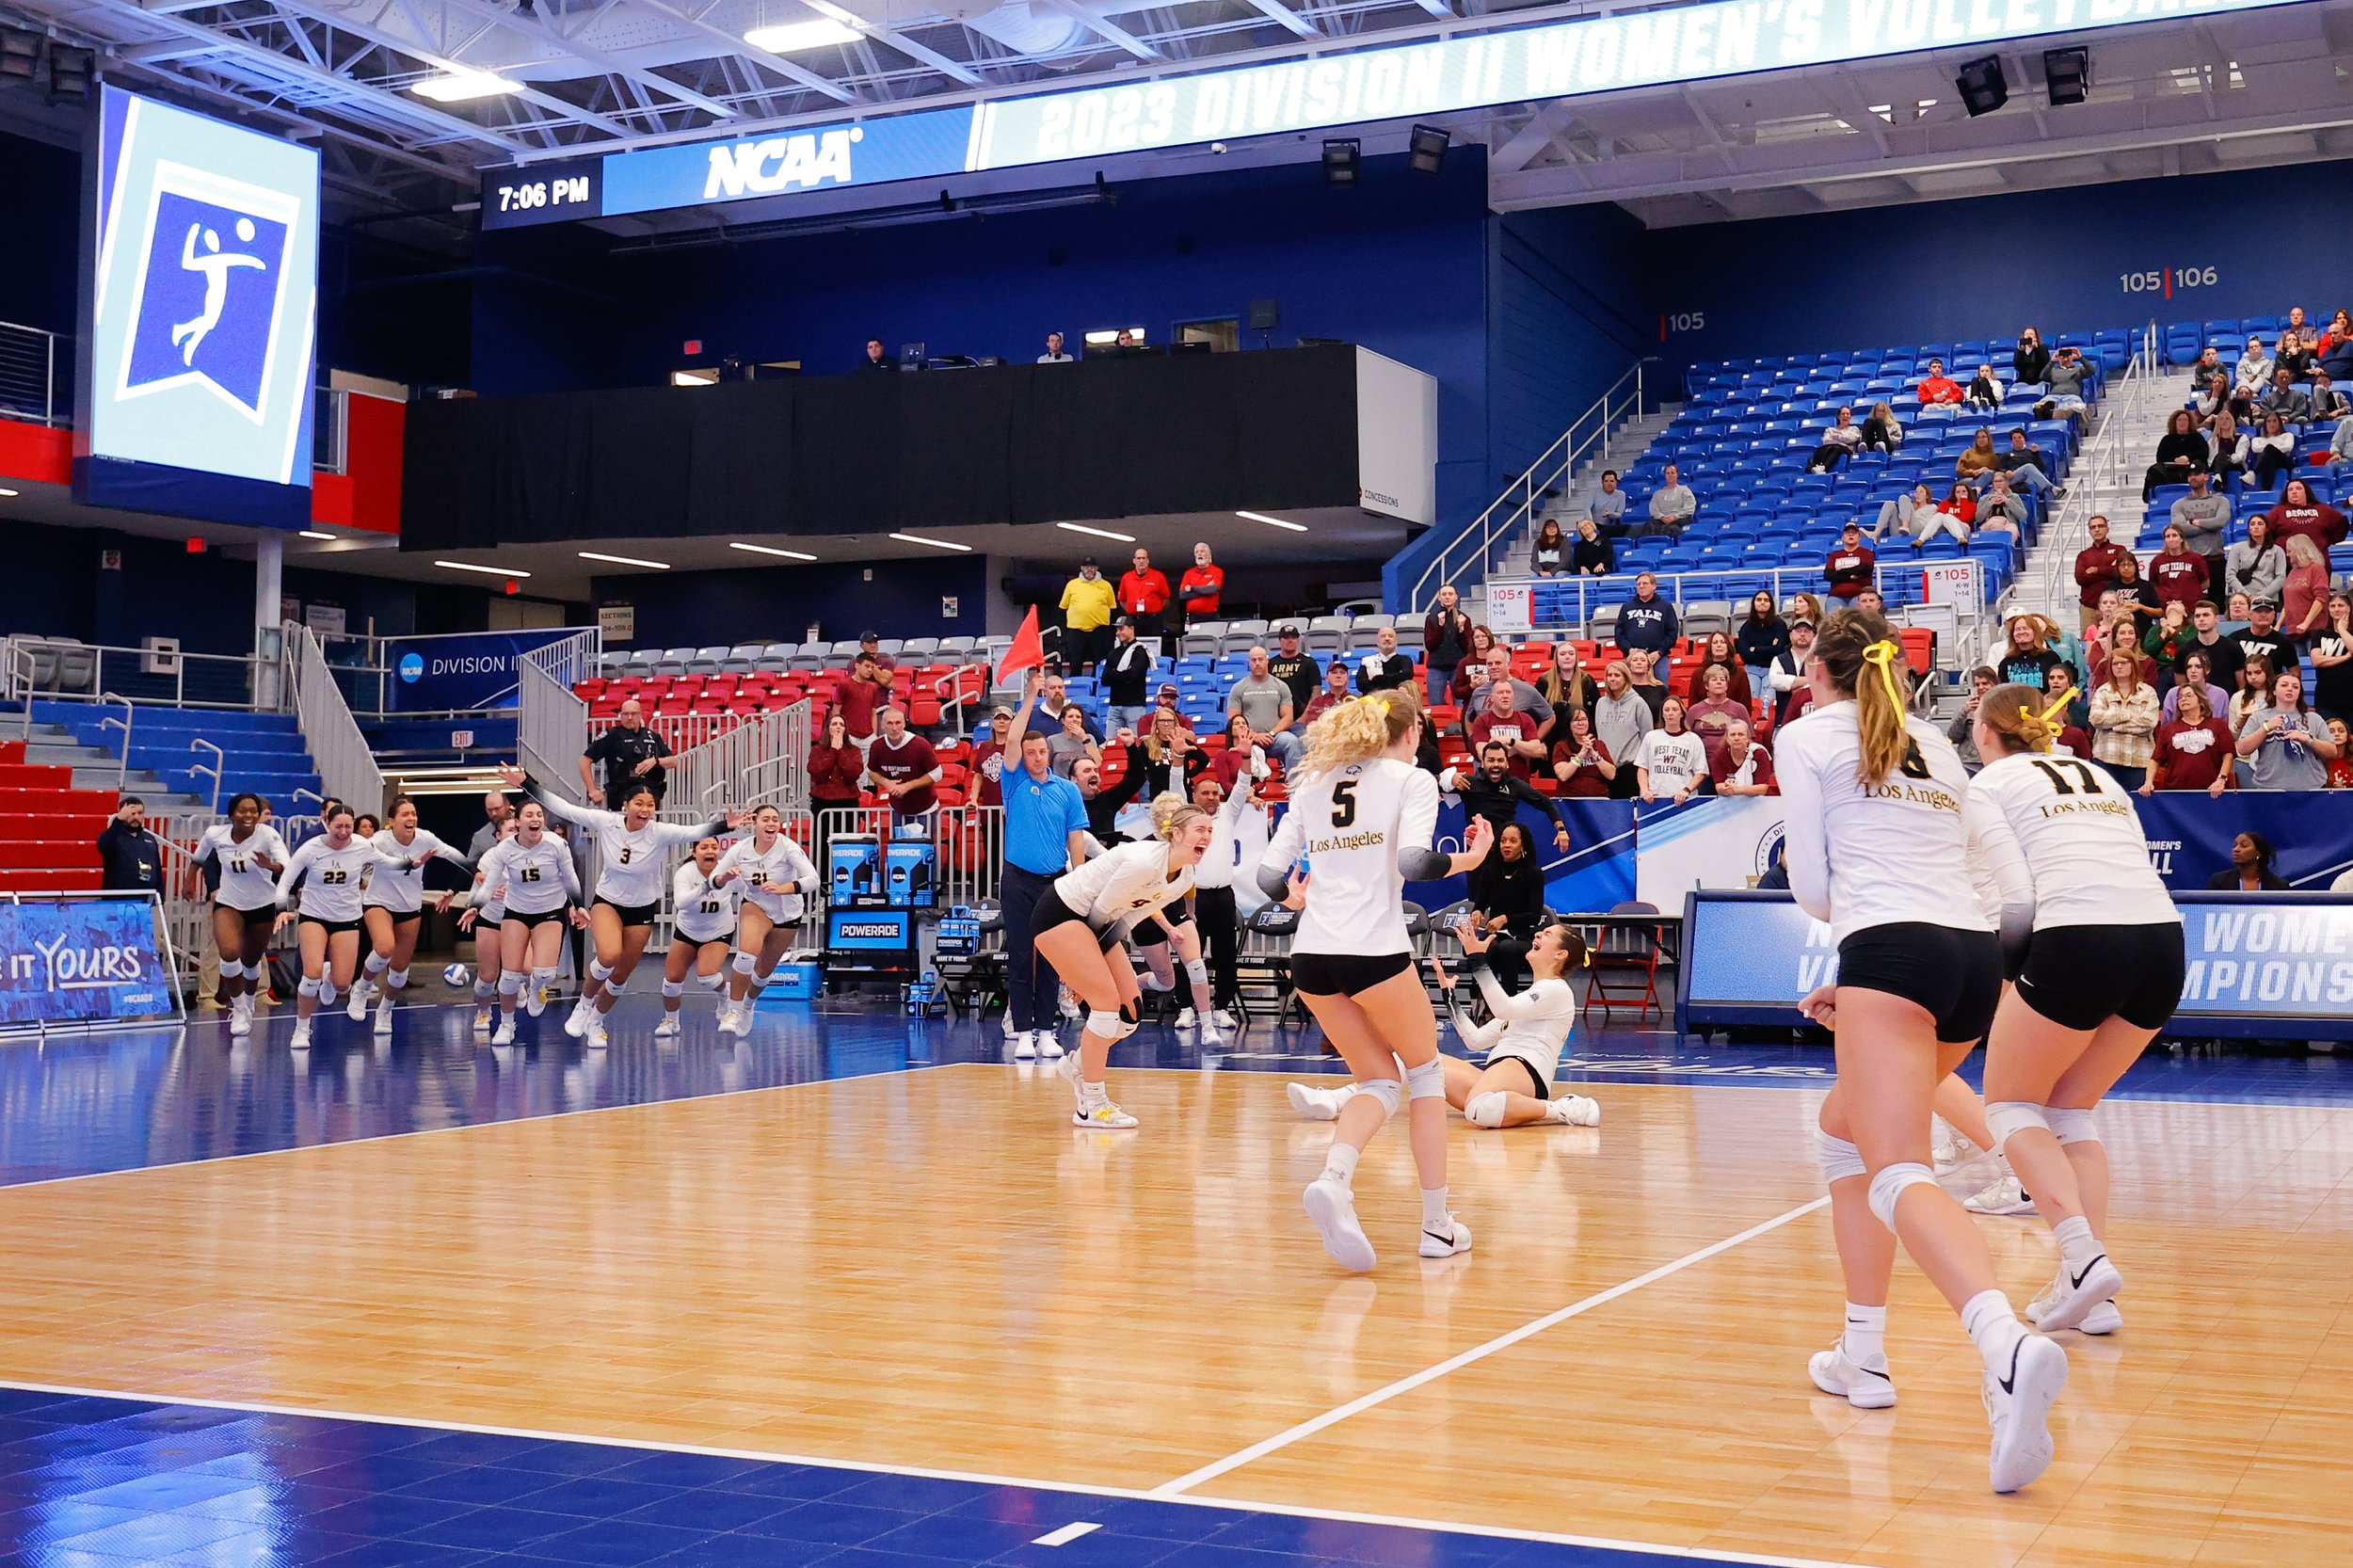  MOON TOWNSHIP, PENNSYLVANIA - DECEMBER 9: The Cal State Los Angeles Golden Eagles celebrate as they defeat the West Texas A&M Buffs to win the Division II Women's Volleyball Championship held at UPMC Events Center on December 9, 2022 in Moon Townshi